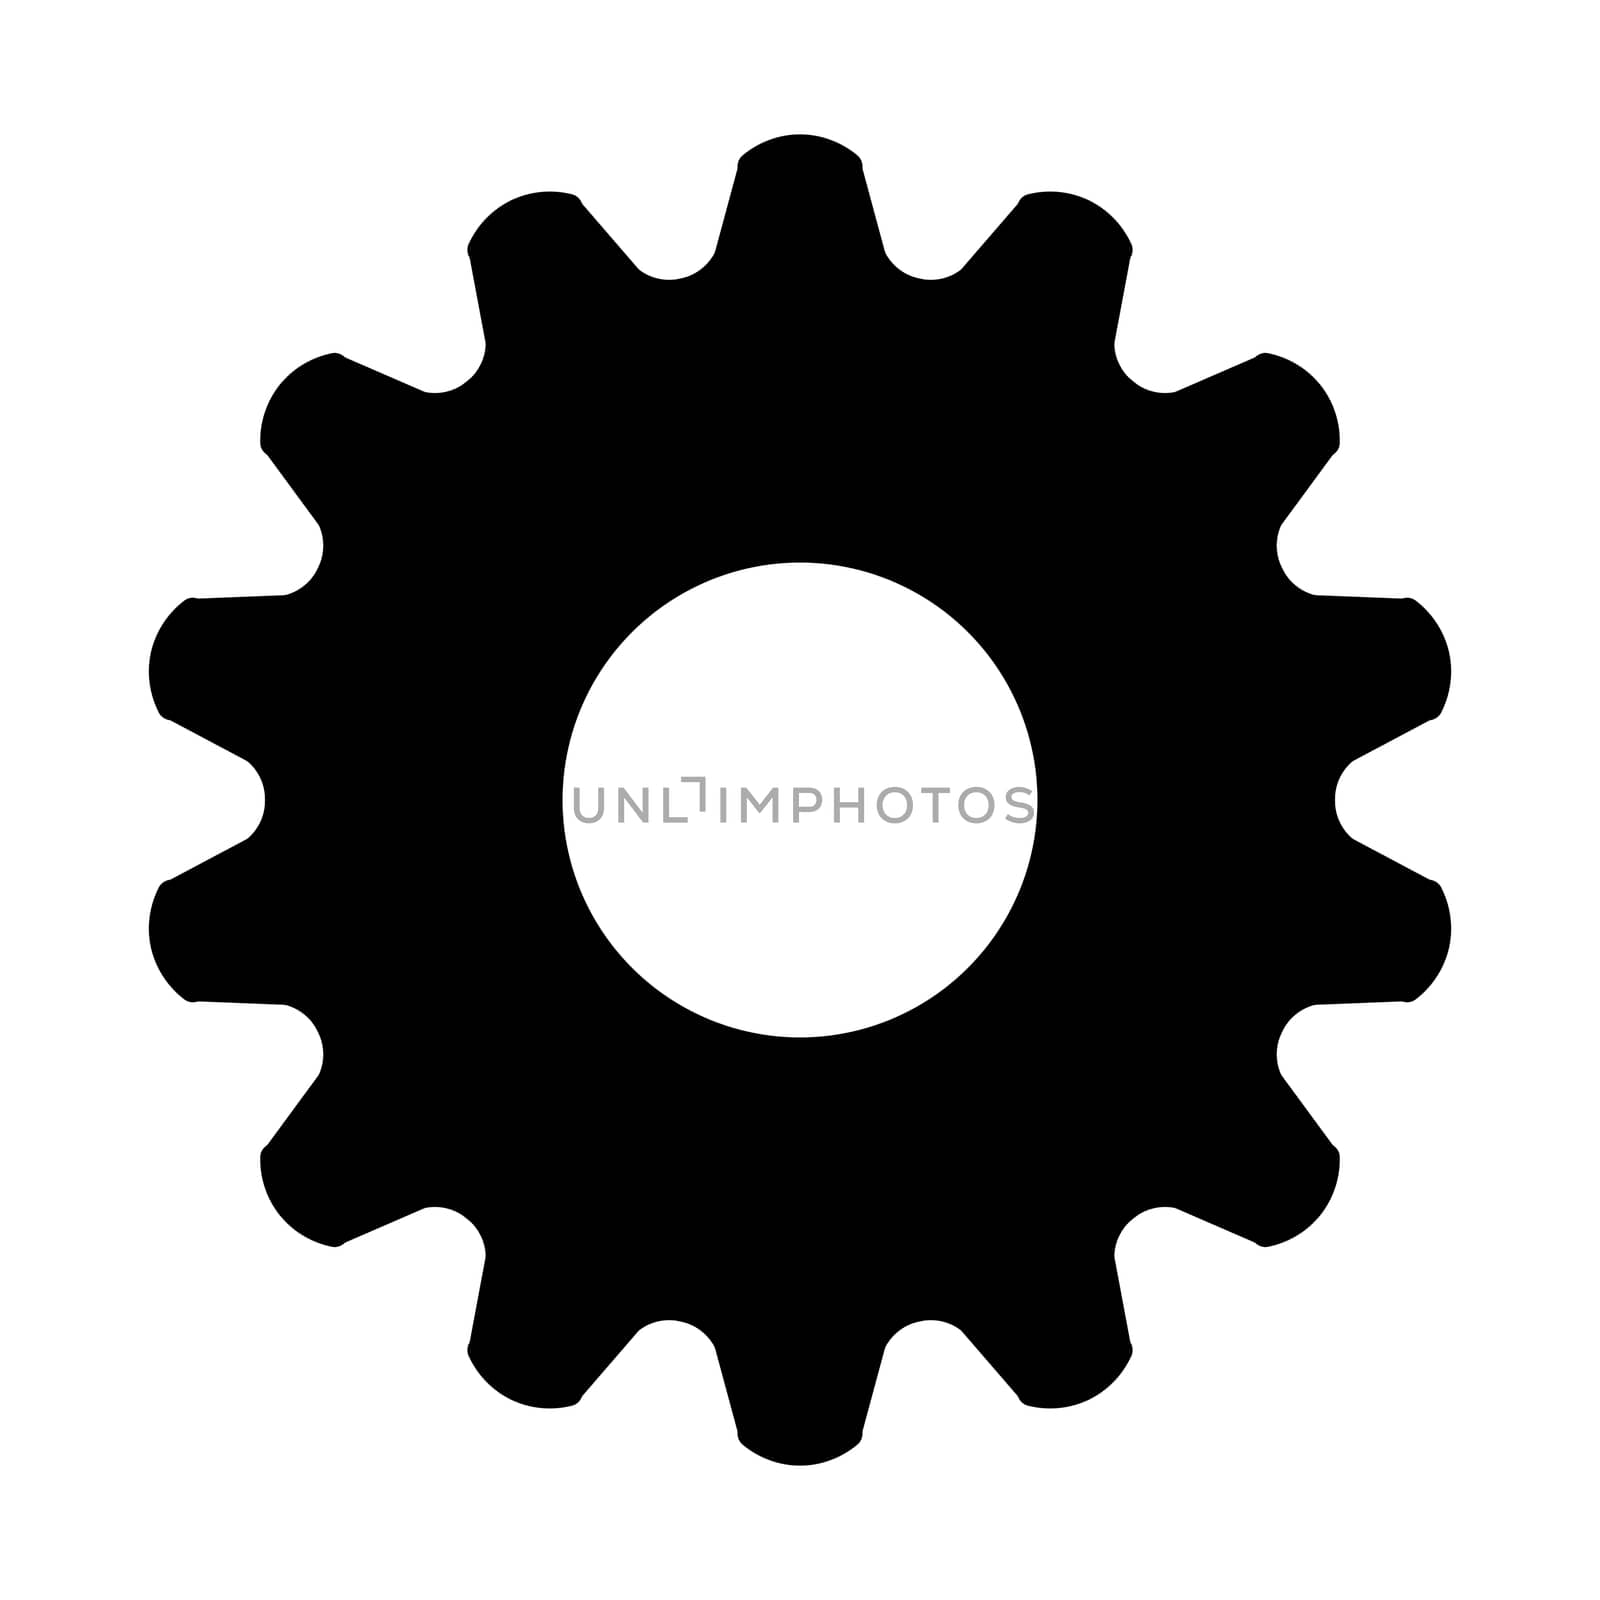 Gear or cog icon on white background.Technological driving, symbol, by praditlohhana